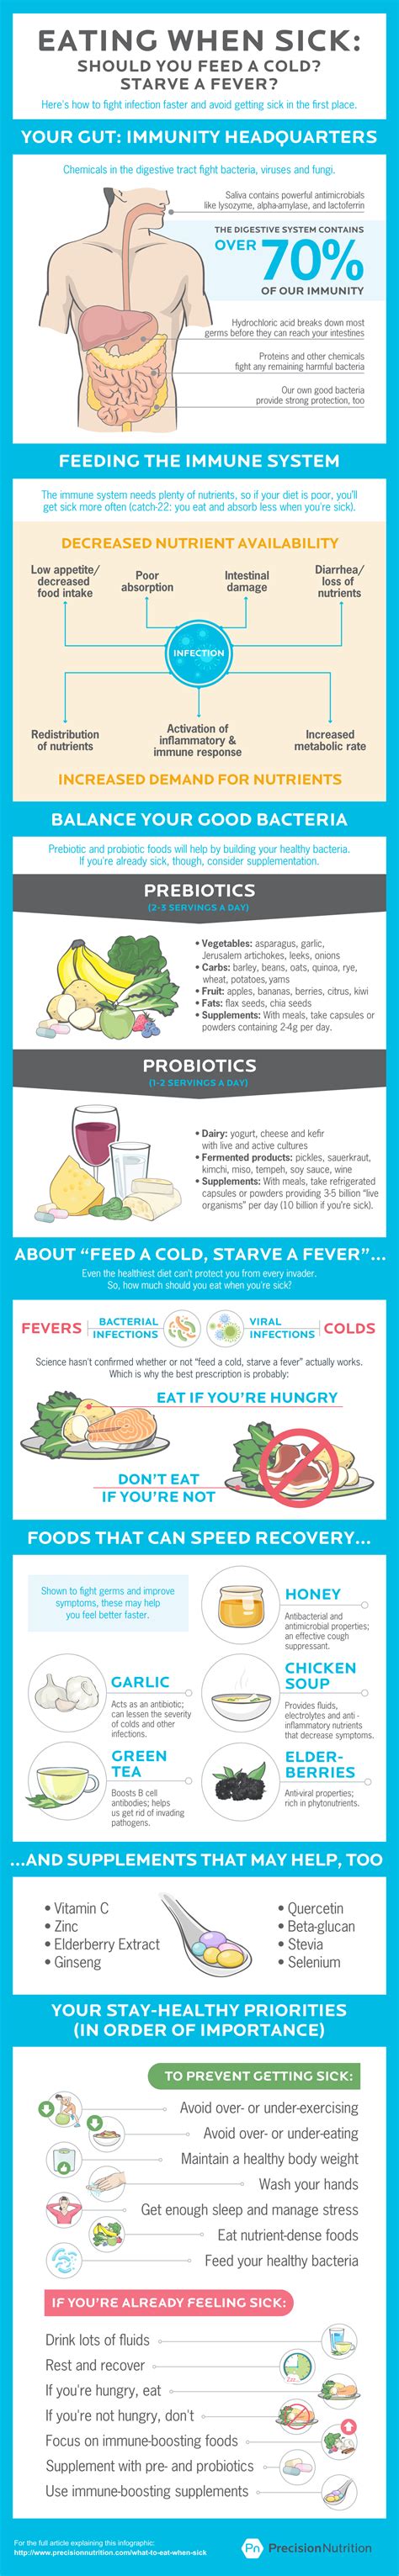 what should you eat when sick [infographic] foods that help you fight